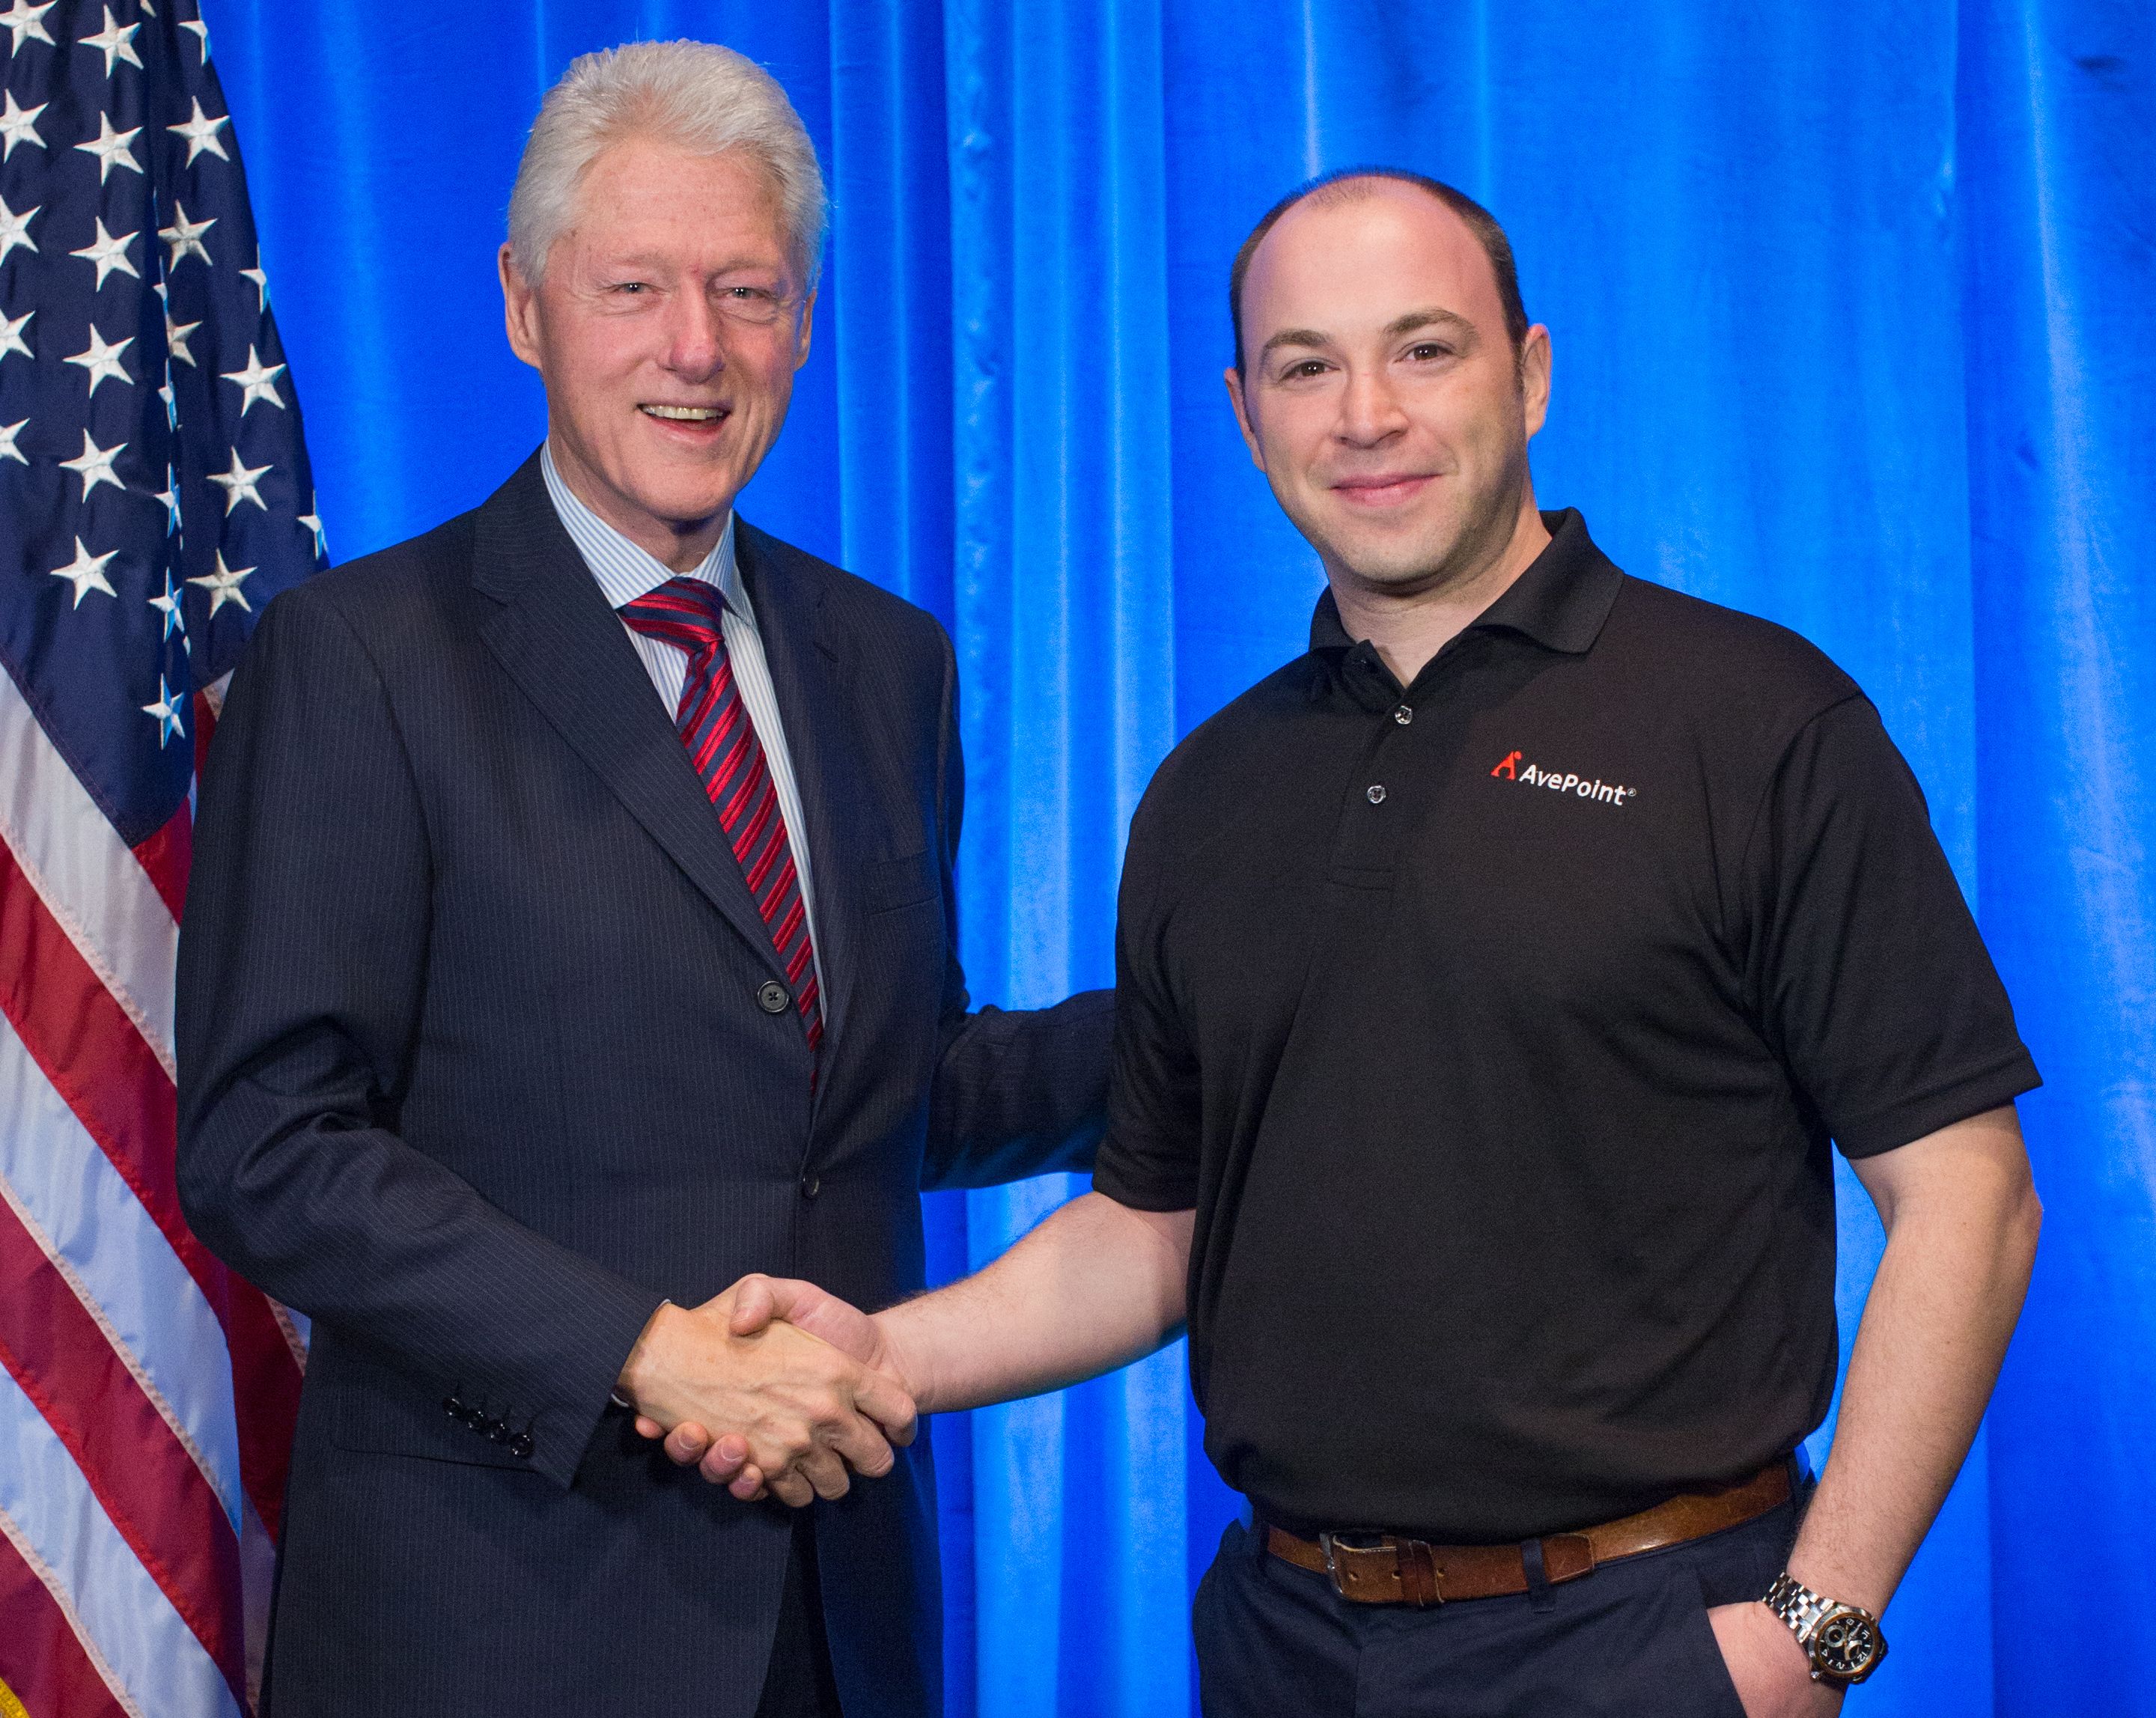 Paul Olenick (right) poses with former United States President Bill Clinton at SharePoint Conference 2014.